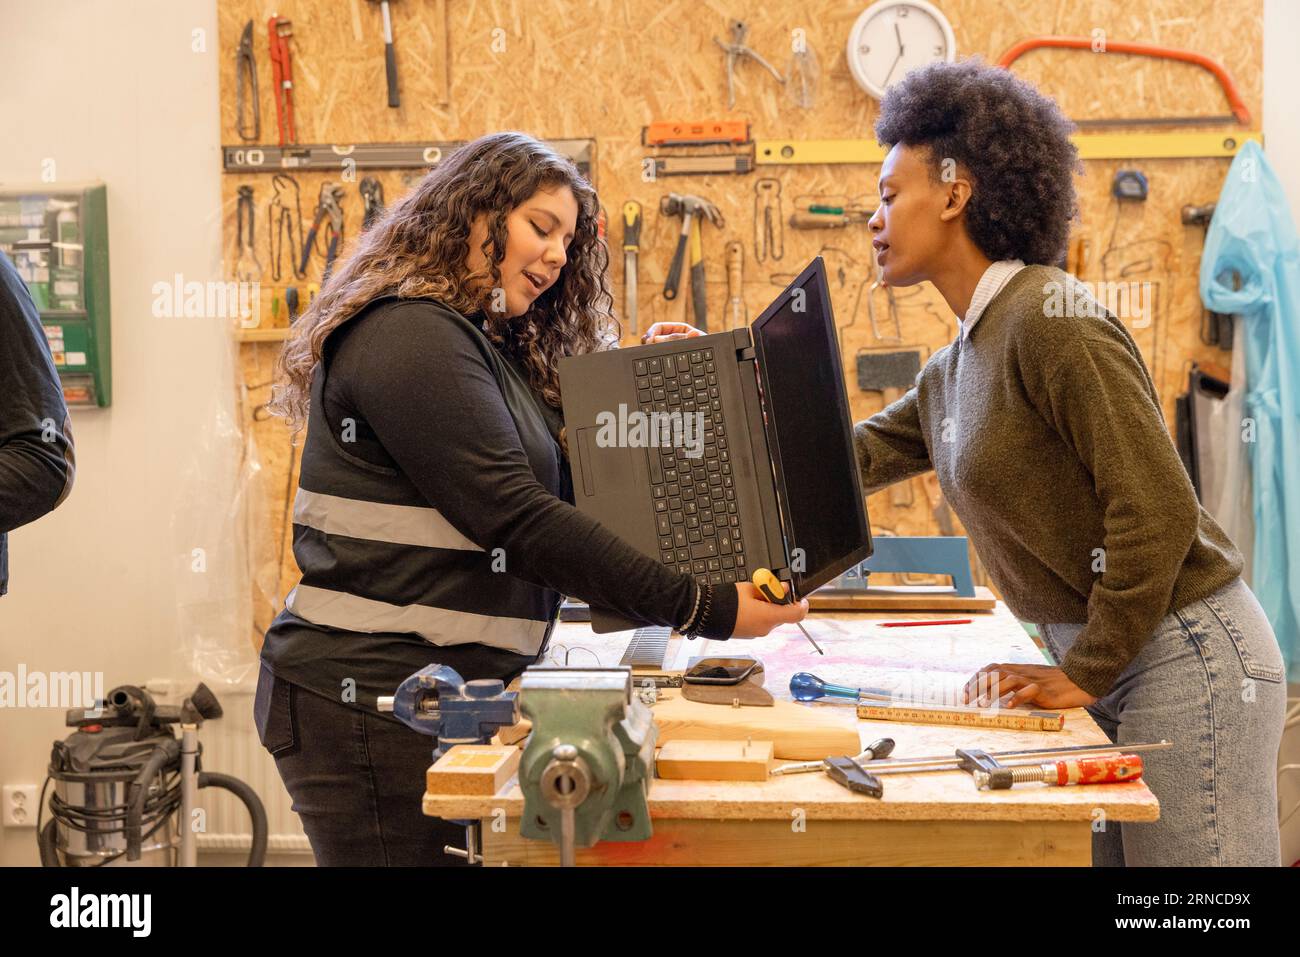 Side view of female customer discussing over laptop with worker at recycling center Stock Photo